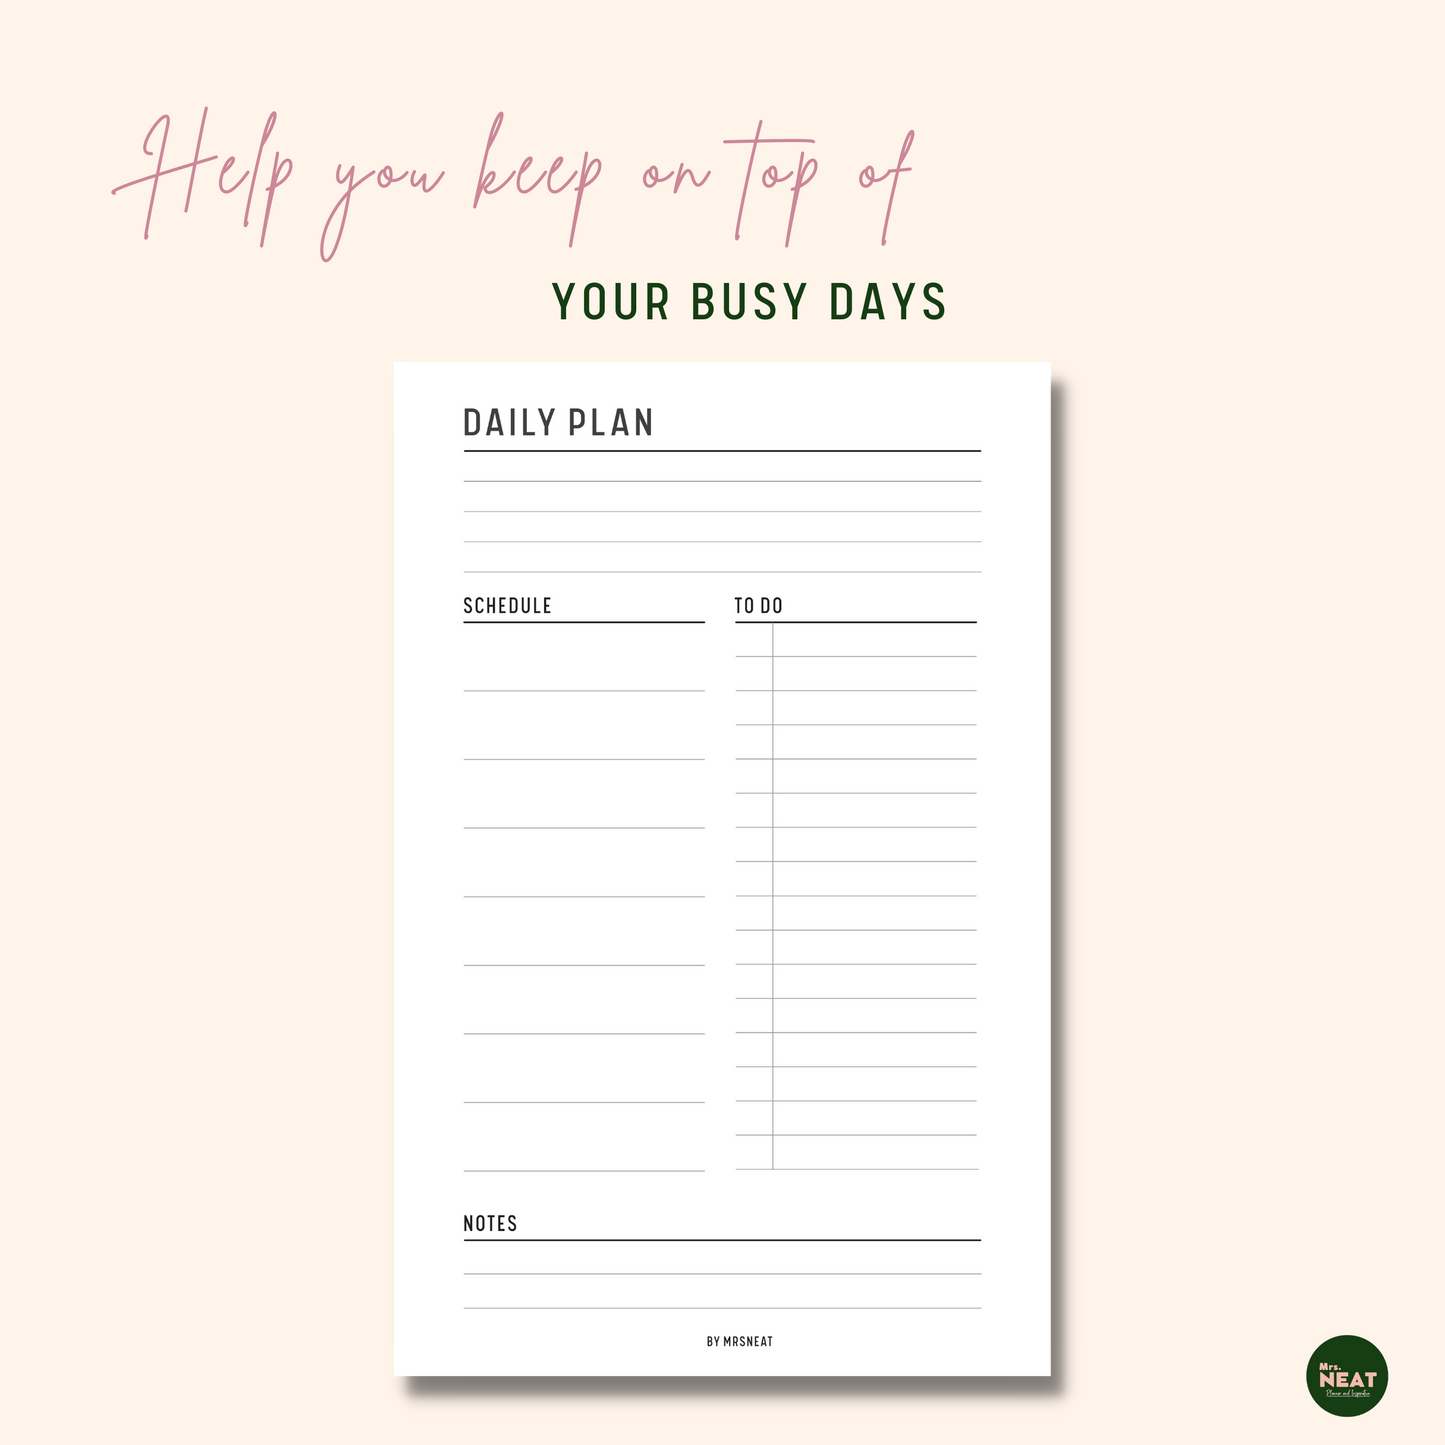 Minimalist Daily Planner to help keep in top on the busy days